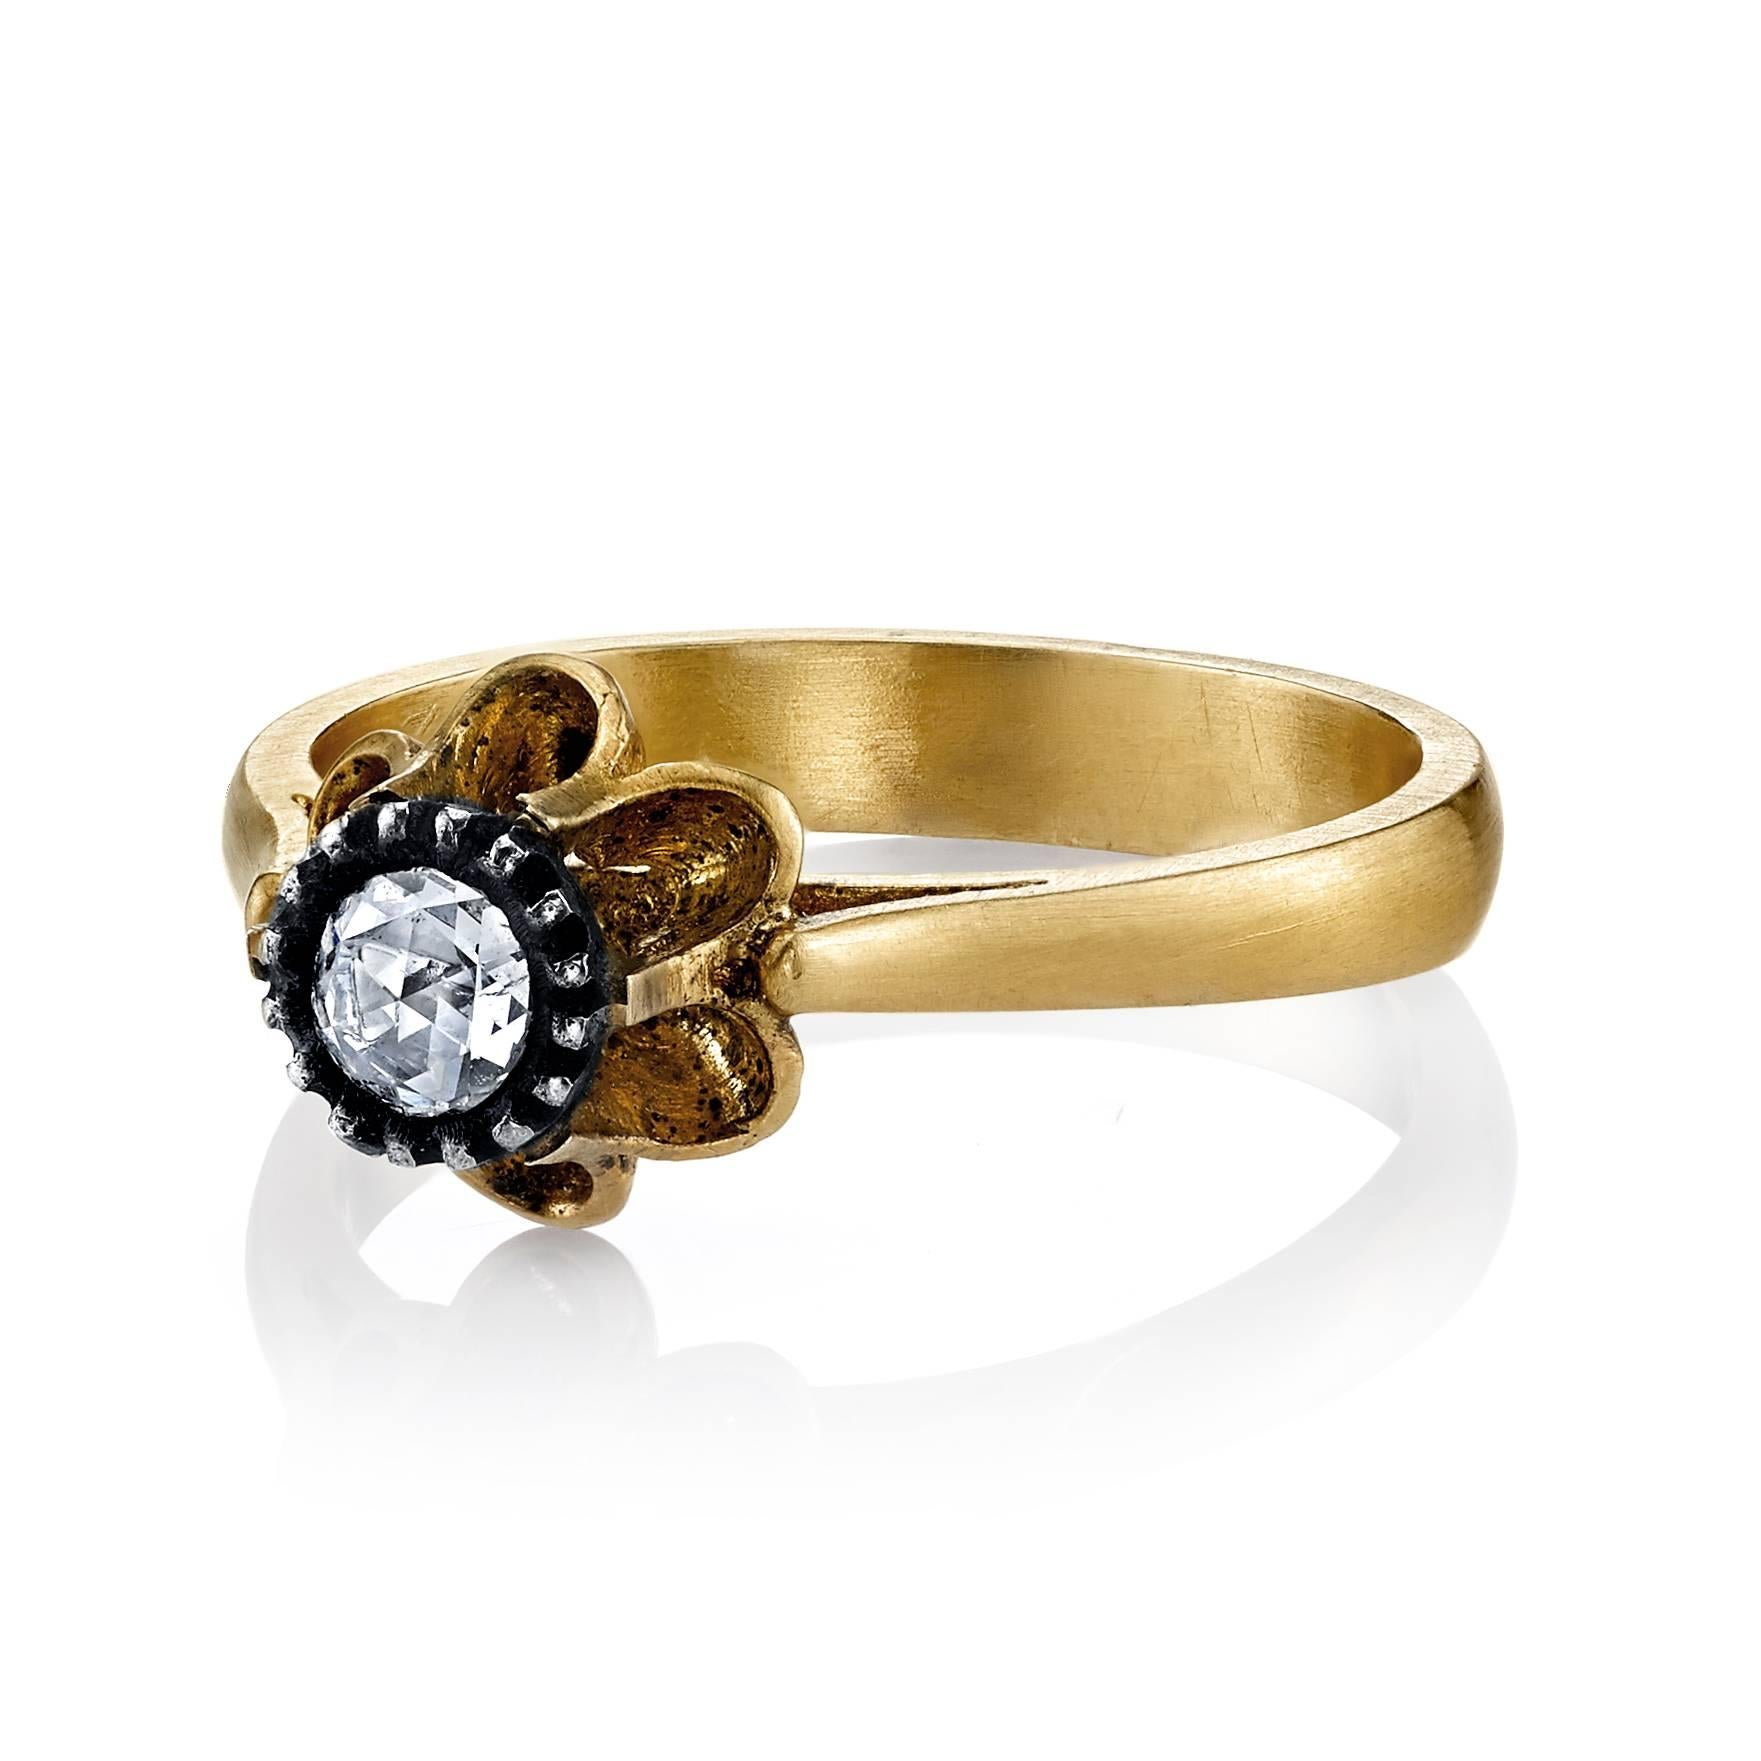 18 Karat Yellow Gold and 0.17 CT Rose Cut Diamond Ring, accented with Silver Patina. 

Inspired by the Edwardian Era, a time when fine jewelry was a crucial component of every outfit, pieces were created to compliment the silk and lace worn by